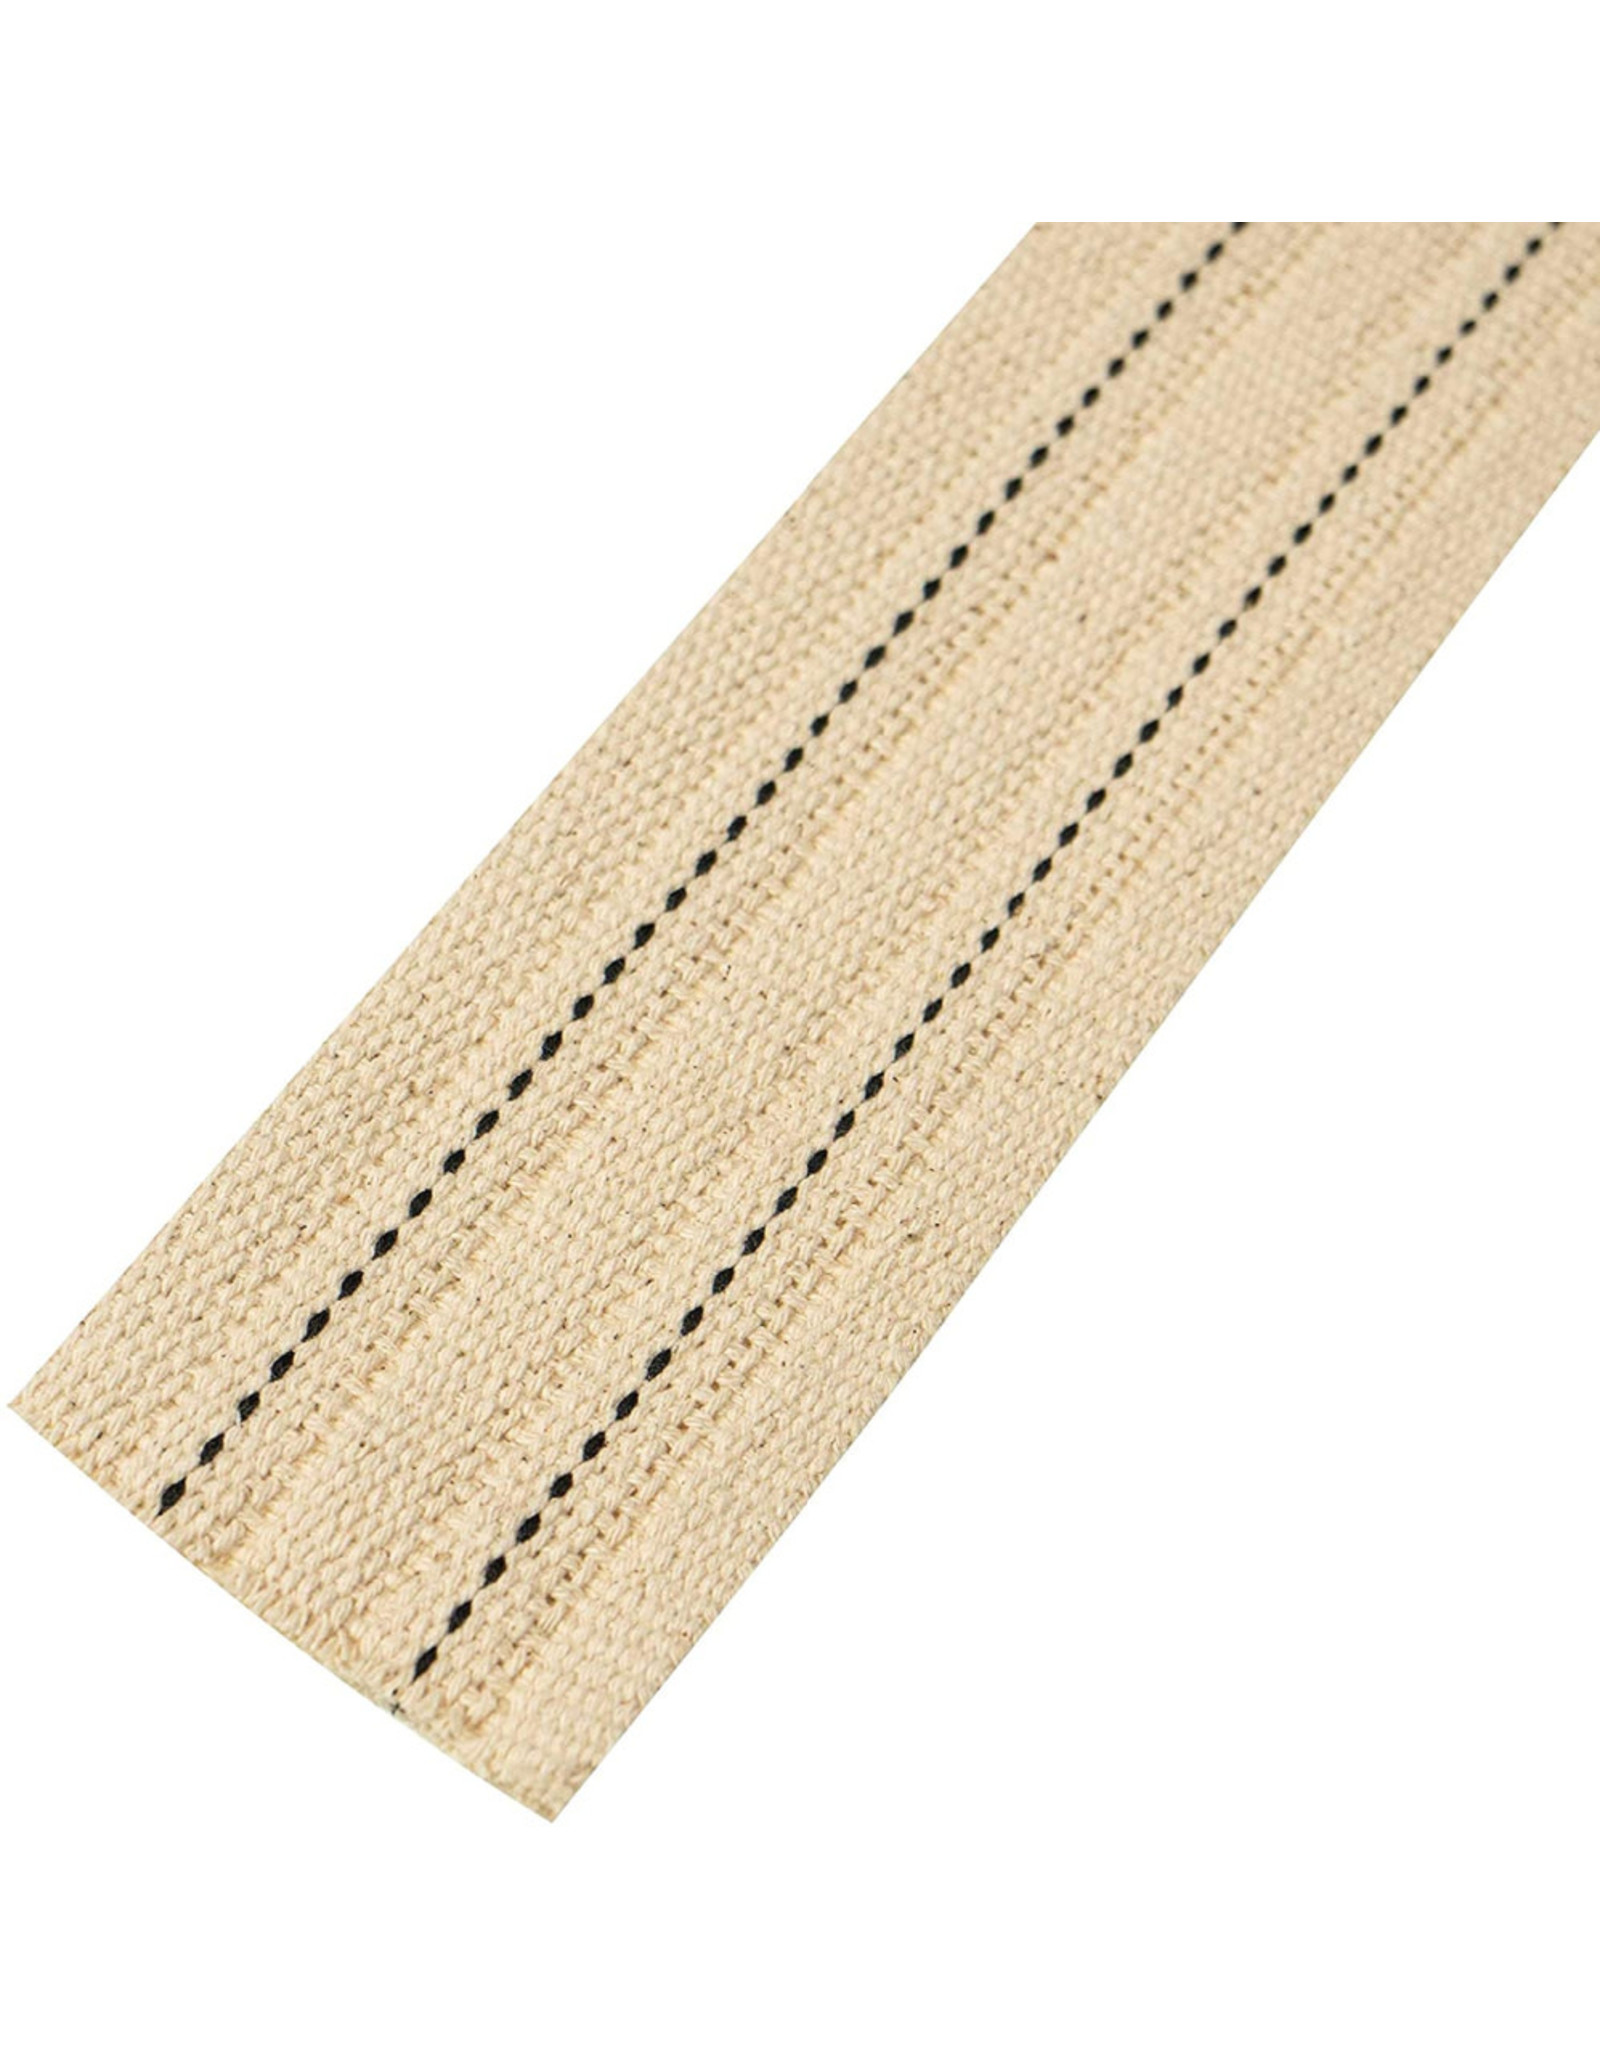 PD Heavyweight Cotton Webbing Strapping 2" wide, by the Yard